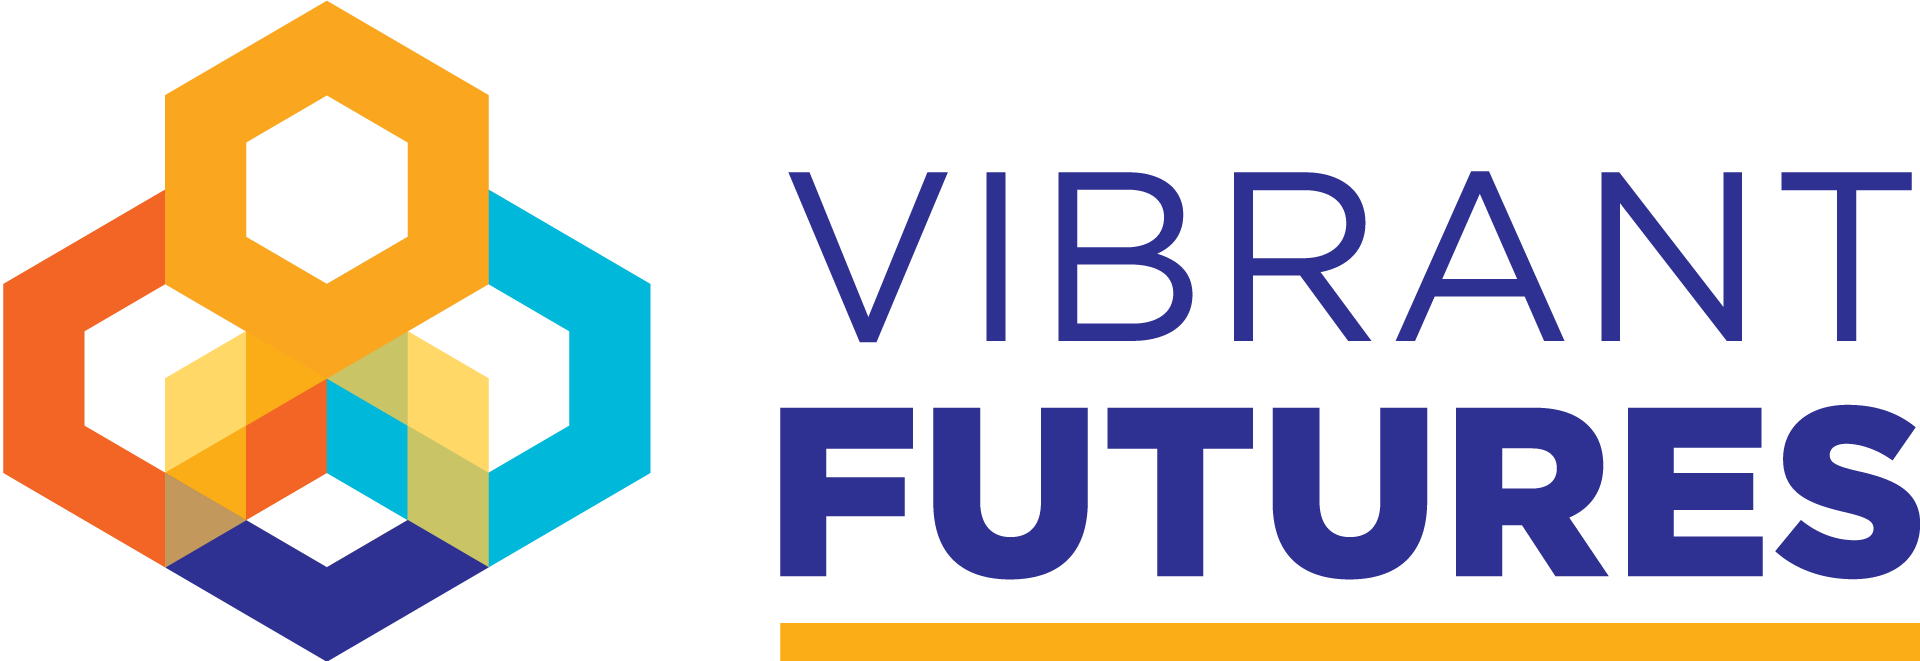 Vibrant Futures - Partnering with communities in 26 counties in